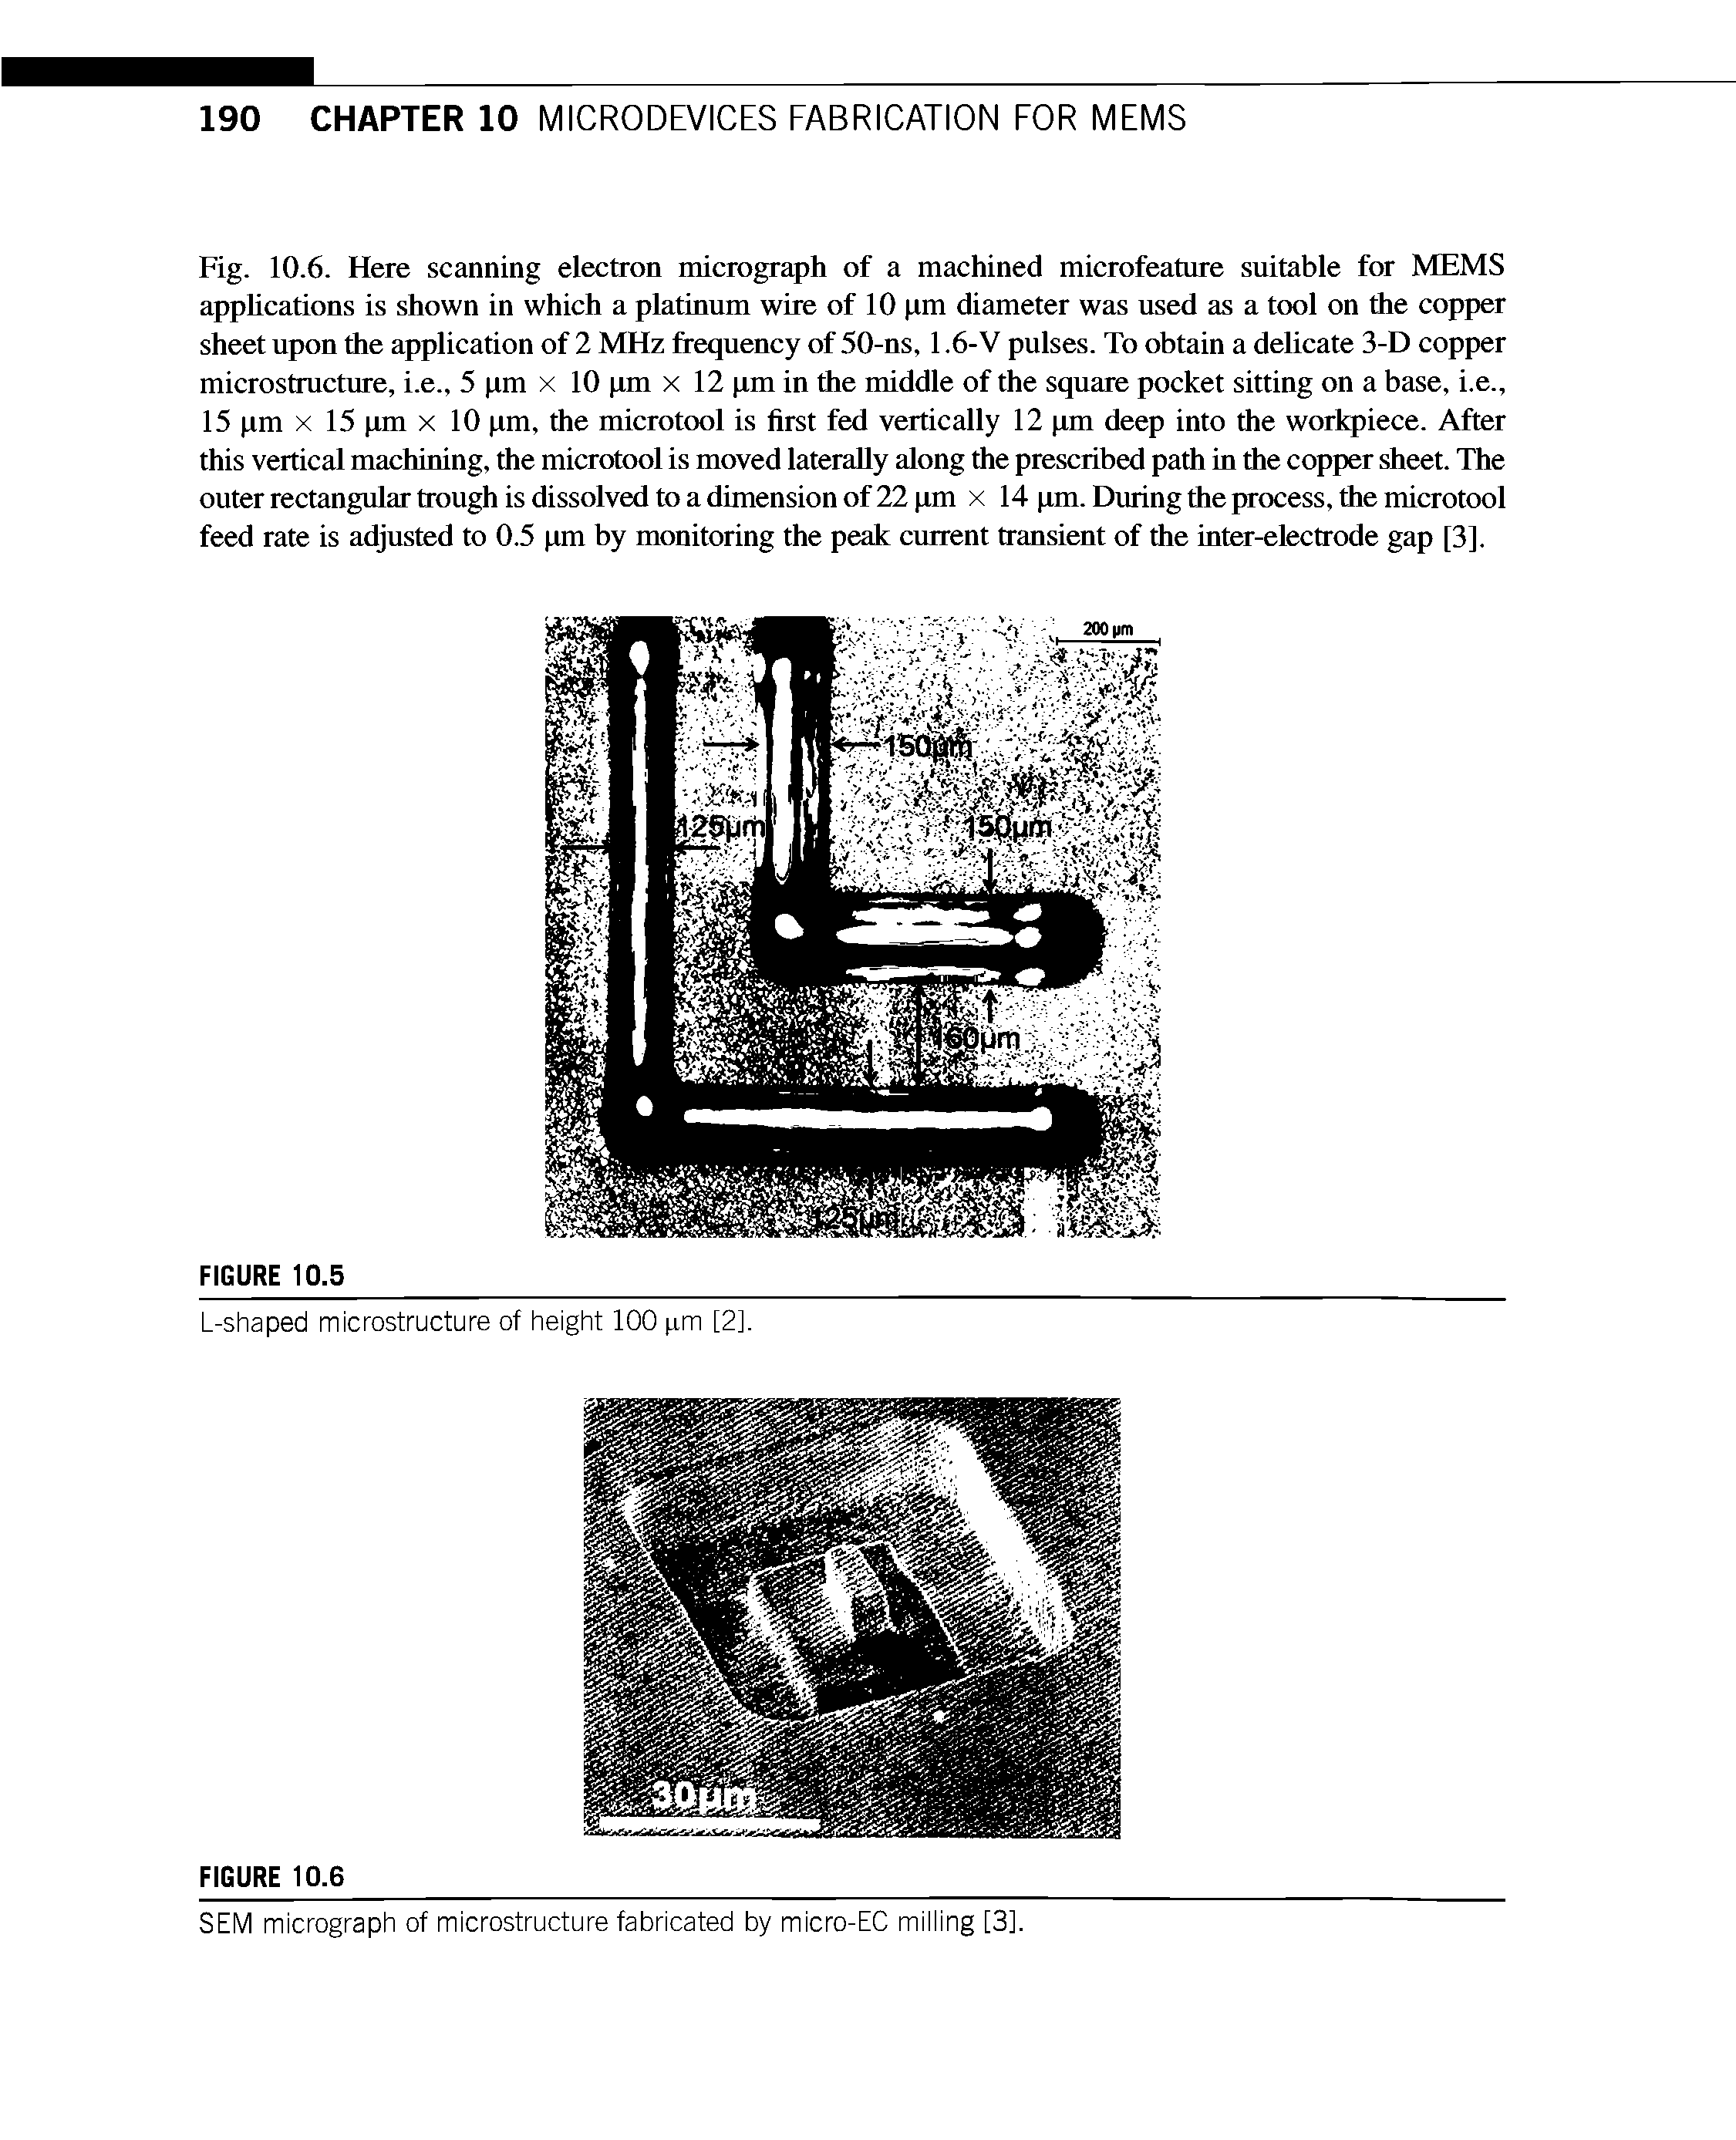 Fig. 10.6. Here scanning electron micrograph of a machined microfeature suitable for MEMS applications is shown in which a platinum wire of 10 (xm diameter was used as a tool on the copper sheet upon the application of 2 MHz frequency of 50-ns, 1.6-V pulses. To obtain a delicate 3-D copper microstructure, i.e., 5 xm x 10 (un x 12 (xm in the middle of the square pocket sitting on a base, i.e., 15 xm X 15 (xm x 10 xm, the microtool is first fed vertically 12 (xm deep into the workpiece. After this vertical machining, the microtool is moved laterally along the prescribed path in the copper sheet. The outer rectangular trough is dissolved to a dimension of 22 (xm x 14 (xm. During the process, the microtool feed rate is adjusted to 0.5 xm by monitoring the peak current transient of the inter-electrode gap [3].